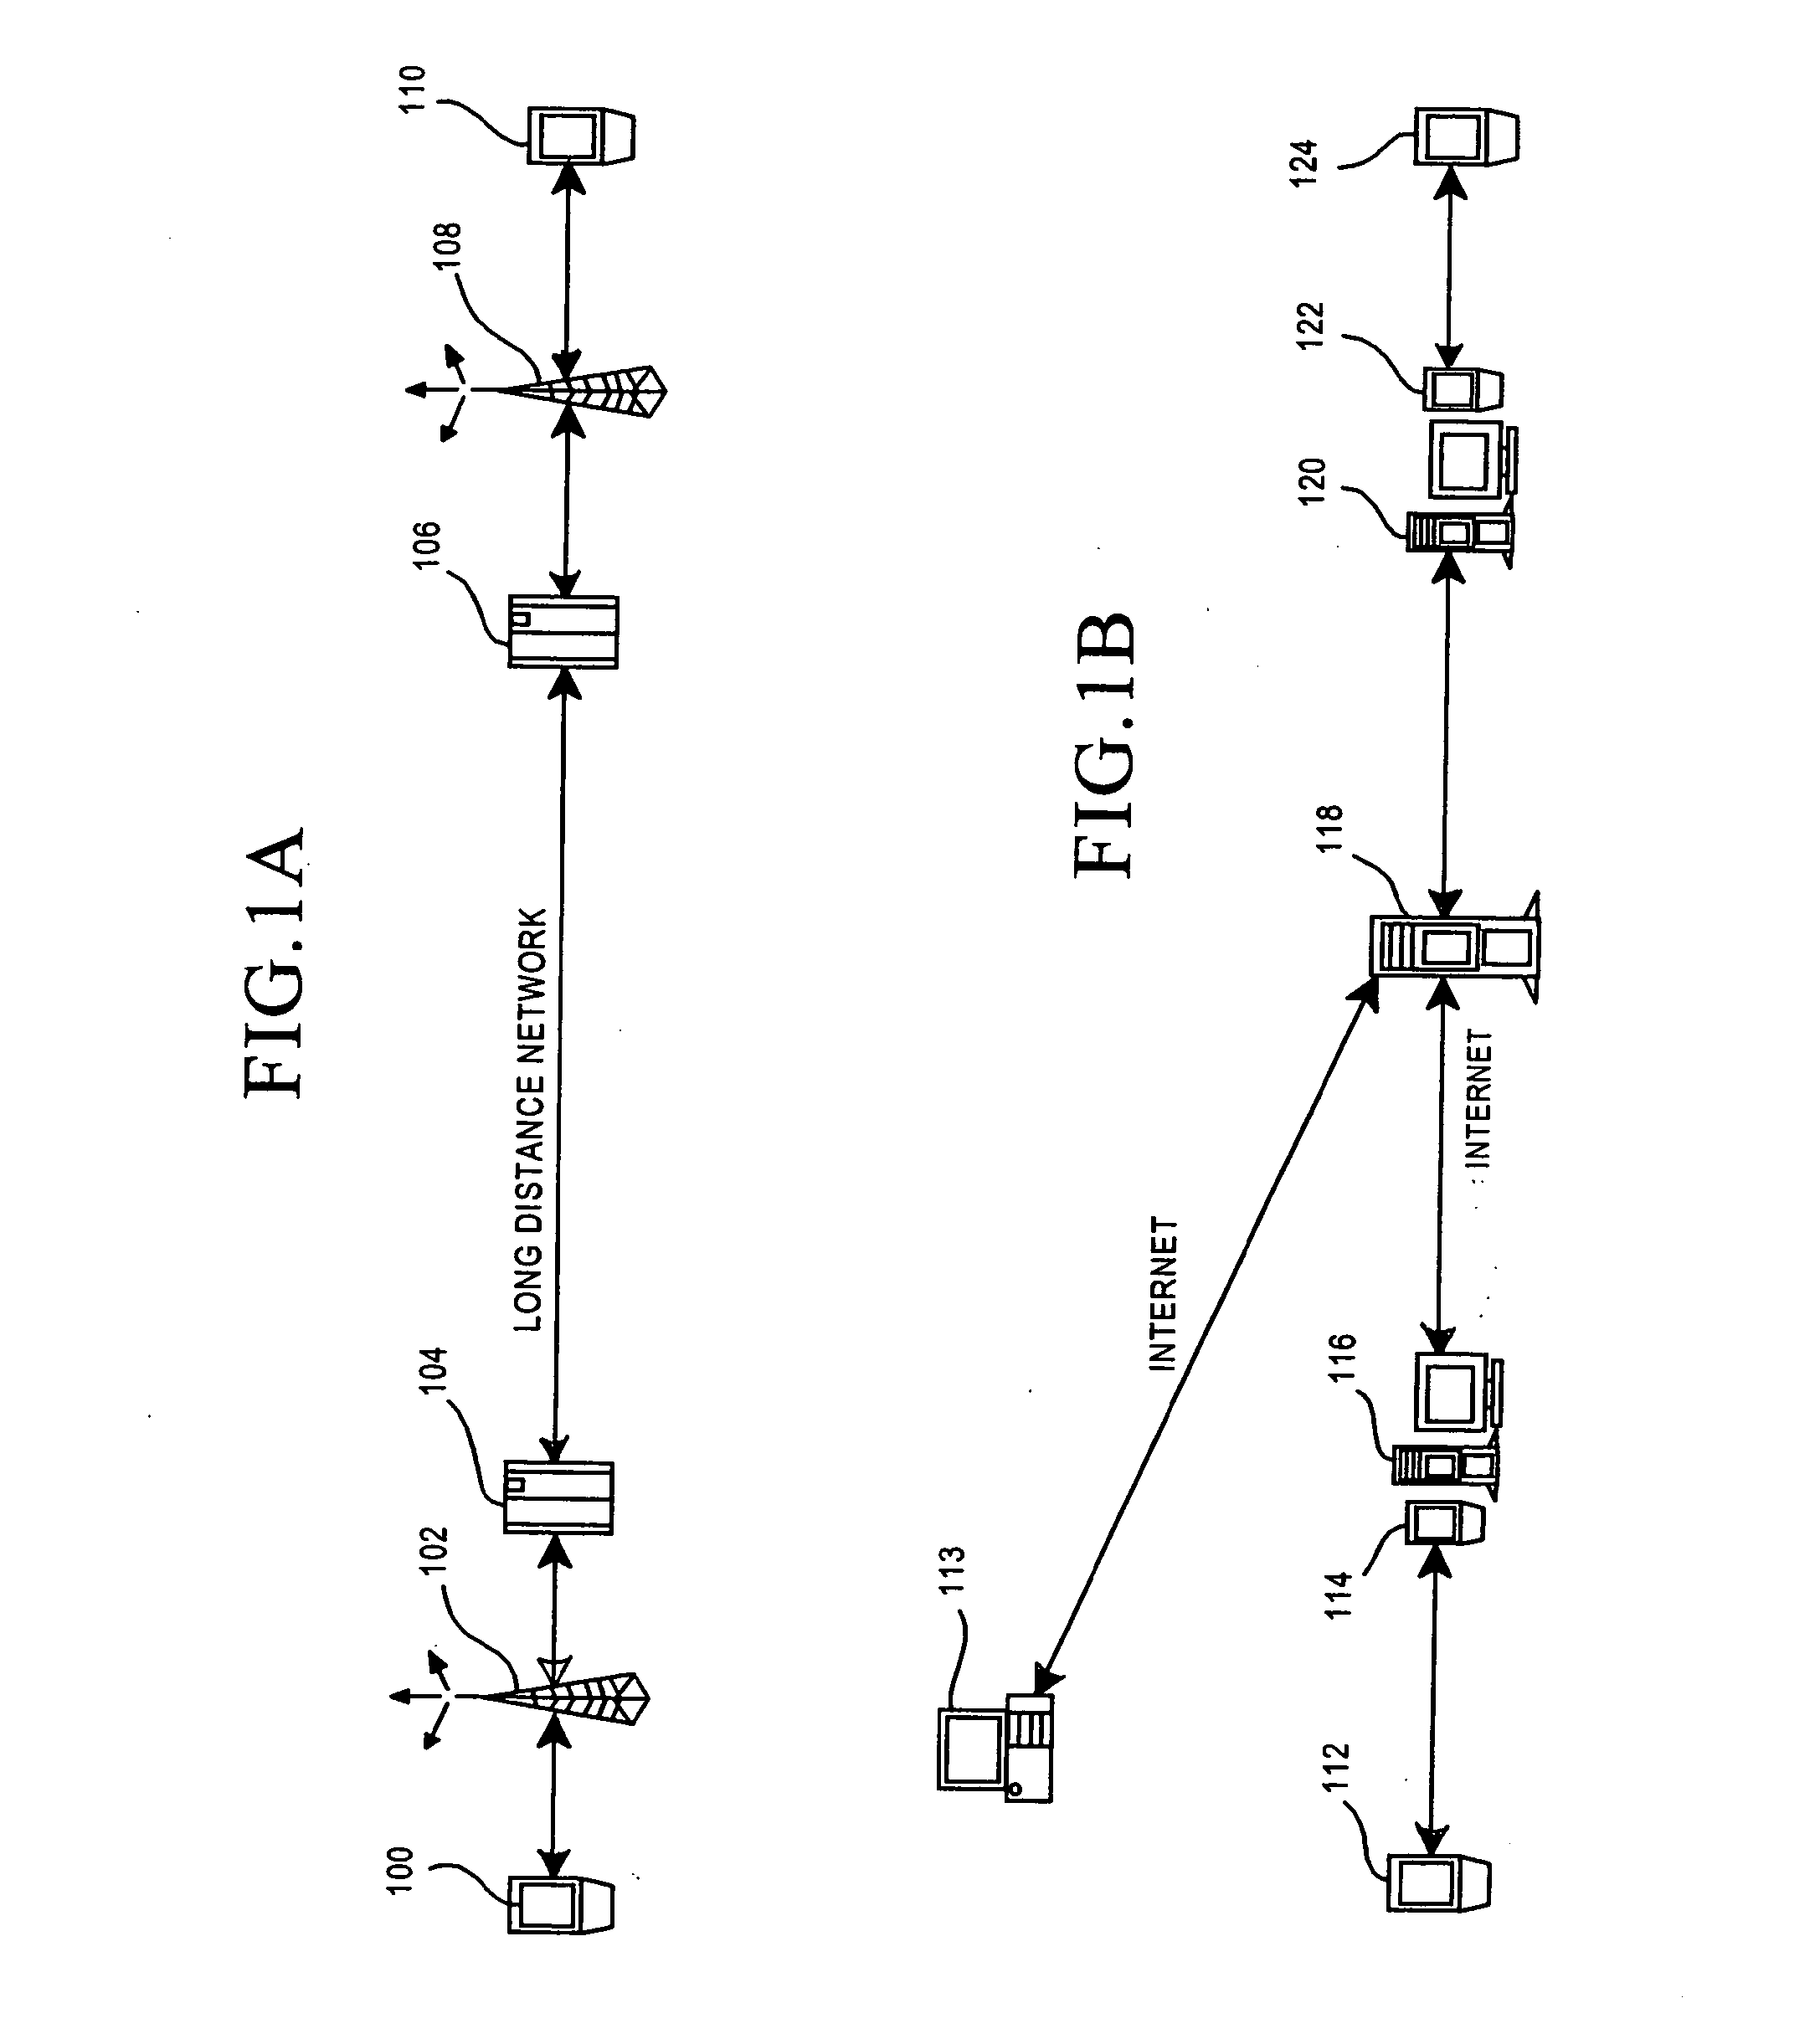 System and method for sending SMS and text messages